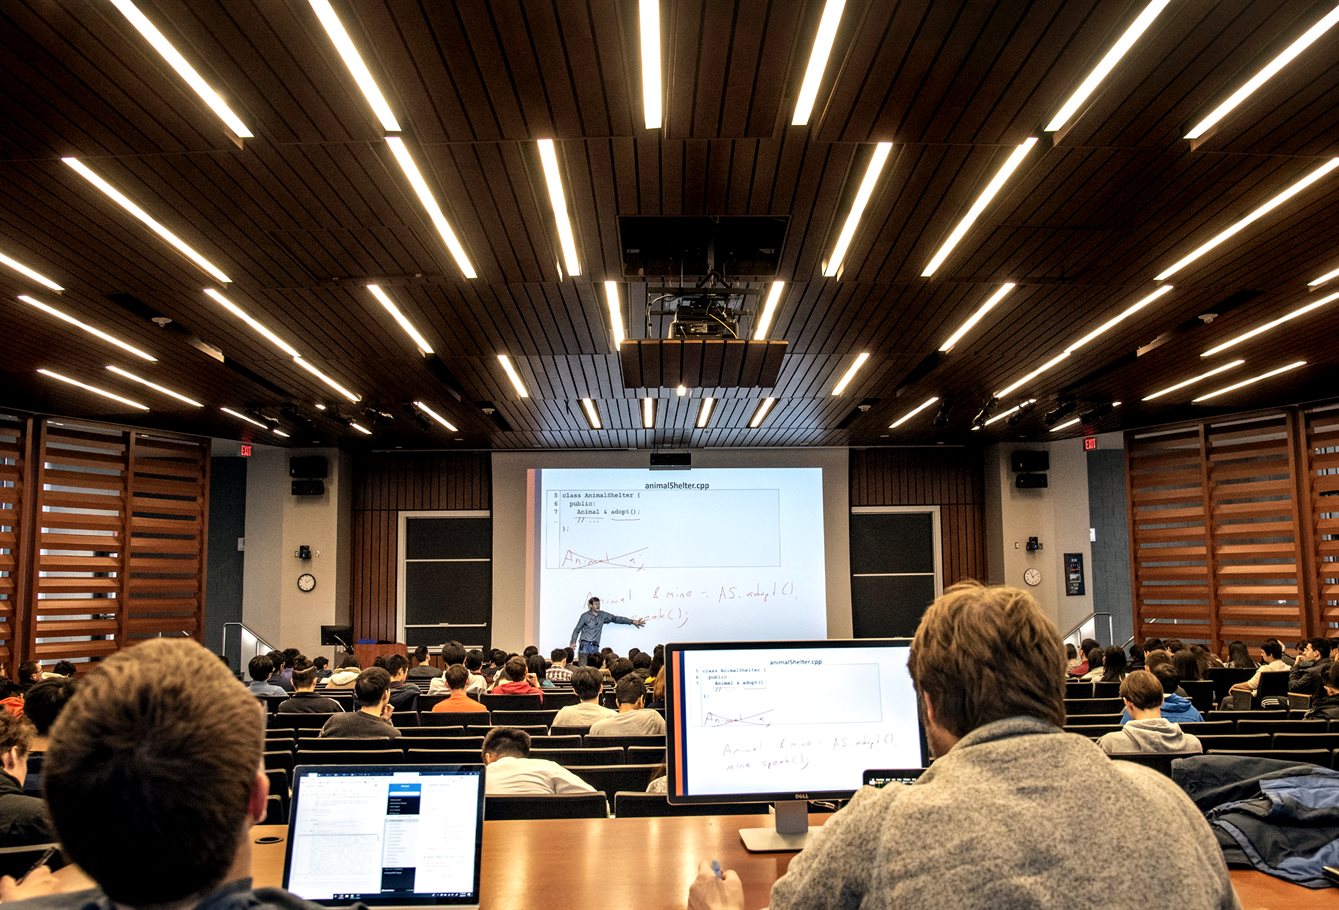 Large classroom with a professor at the front, students on laptops, and thin vertical fluorescent lights on the ceiling.